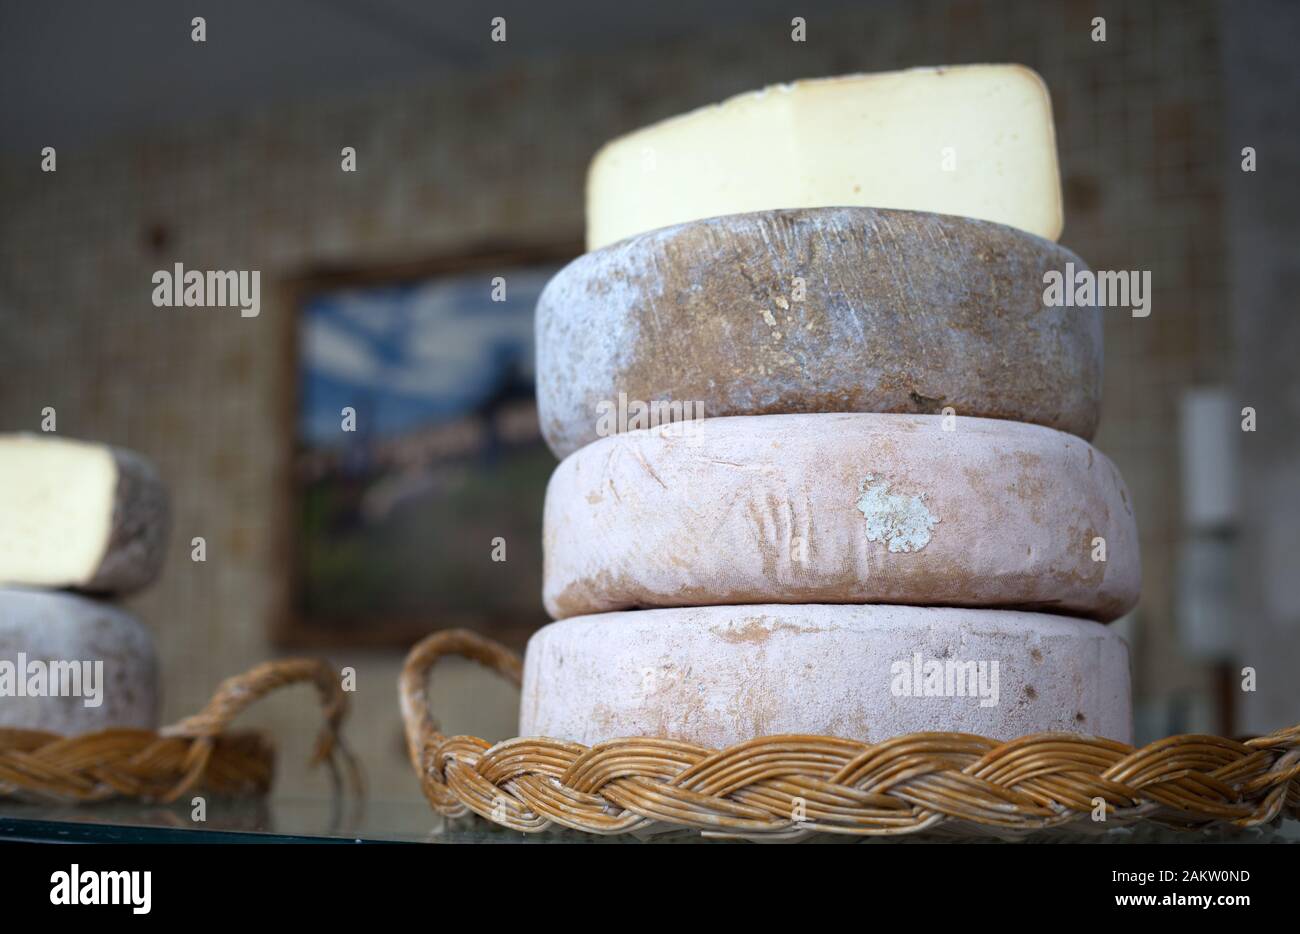 Delicious artisan Pyrenean cheese on sale at the indoor market of Nay, Pyrenees Atlantiques, Nouvelle Aquitaine, France Stock Photo